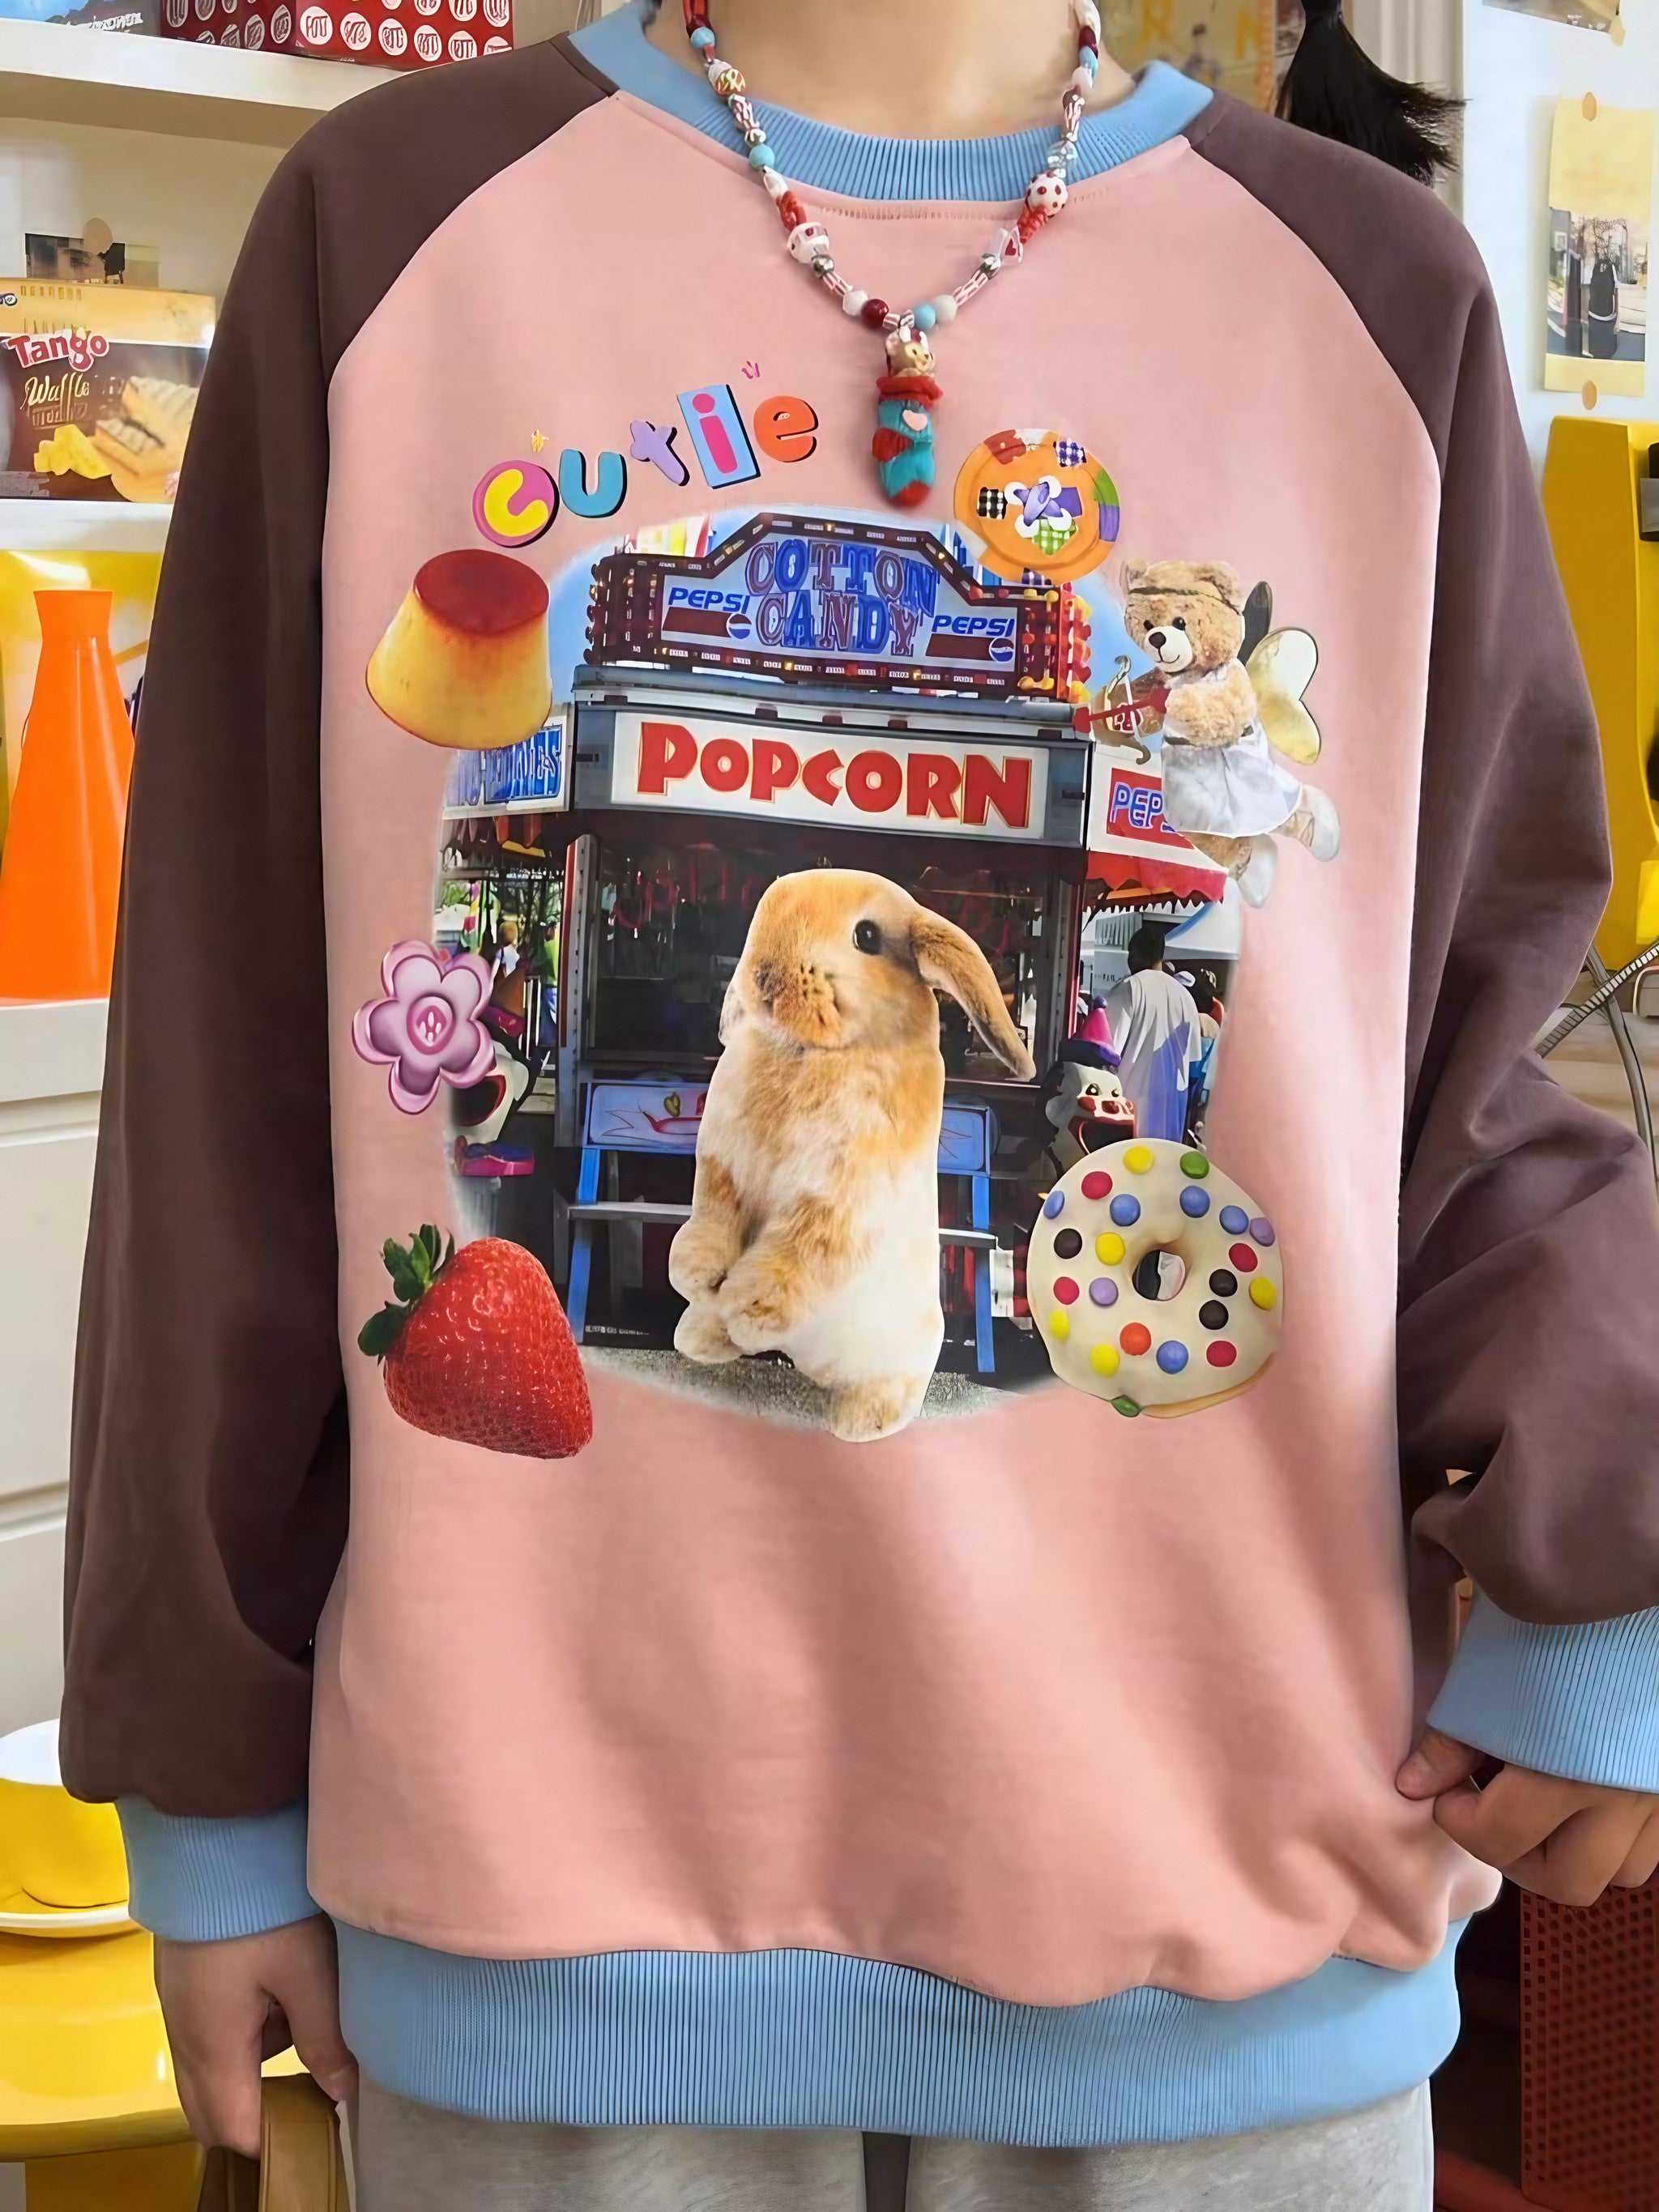 A youthful individual in a Gen Z inspired sweatshirt featuring a bunny design